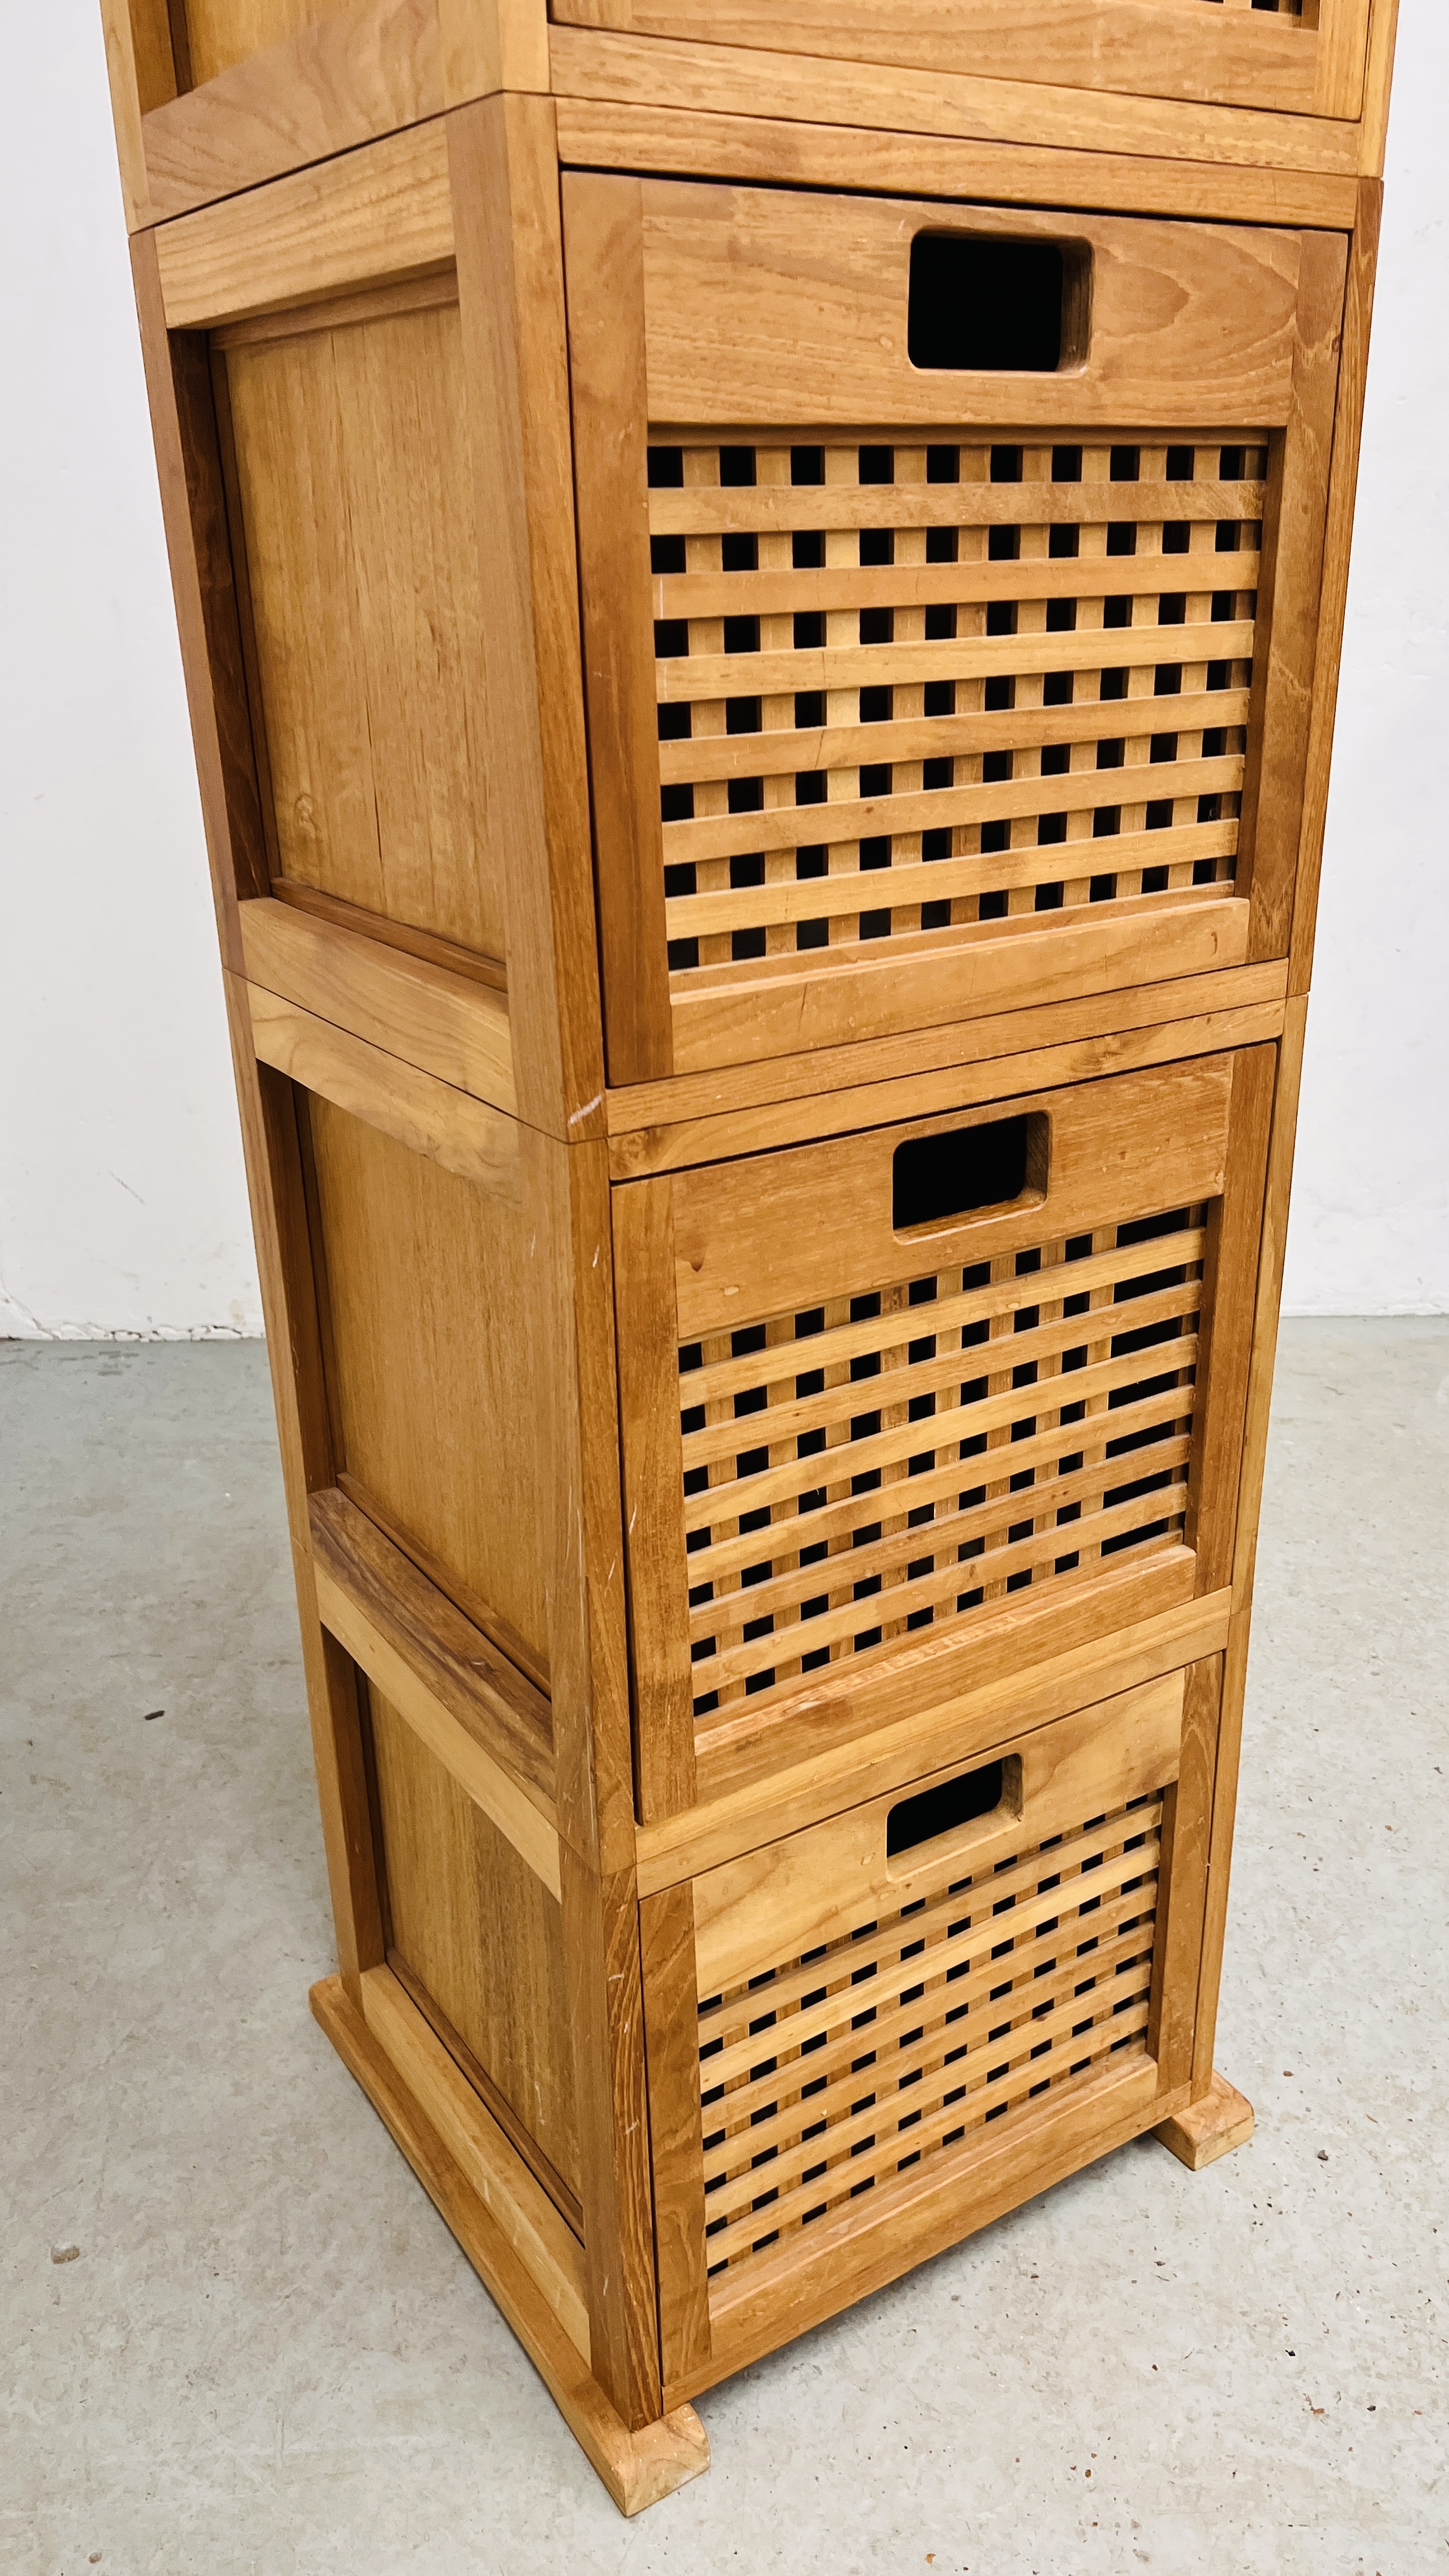 A 5 SECTION WOODEN SLATTED FRONT STACKING DRAWER TOWER. 1 DRAWER A/F - W 43CM. X H 171CM. X D 41CM. - Image 3 of 6